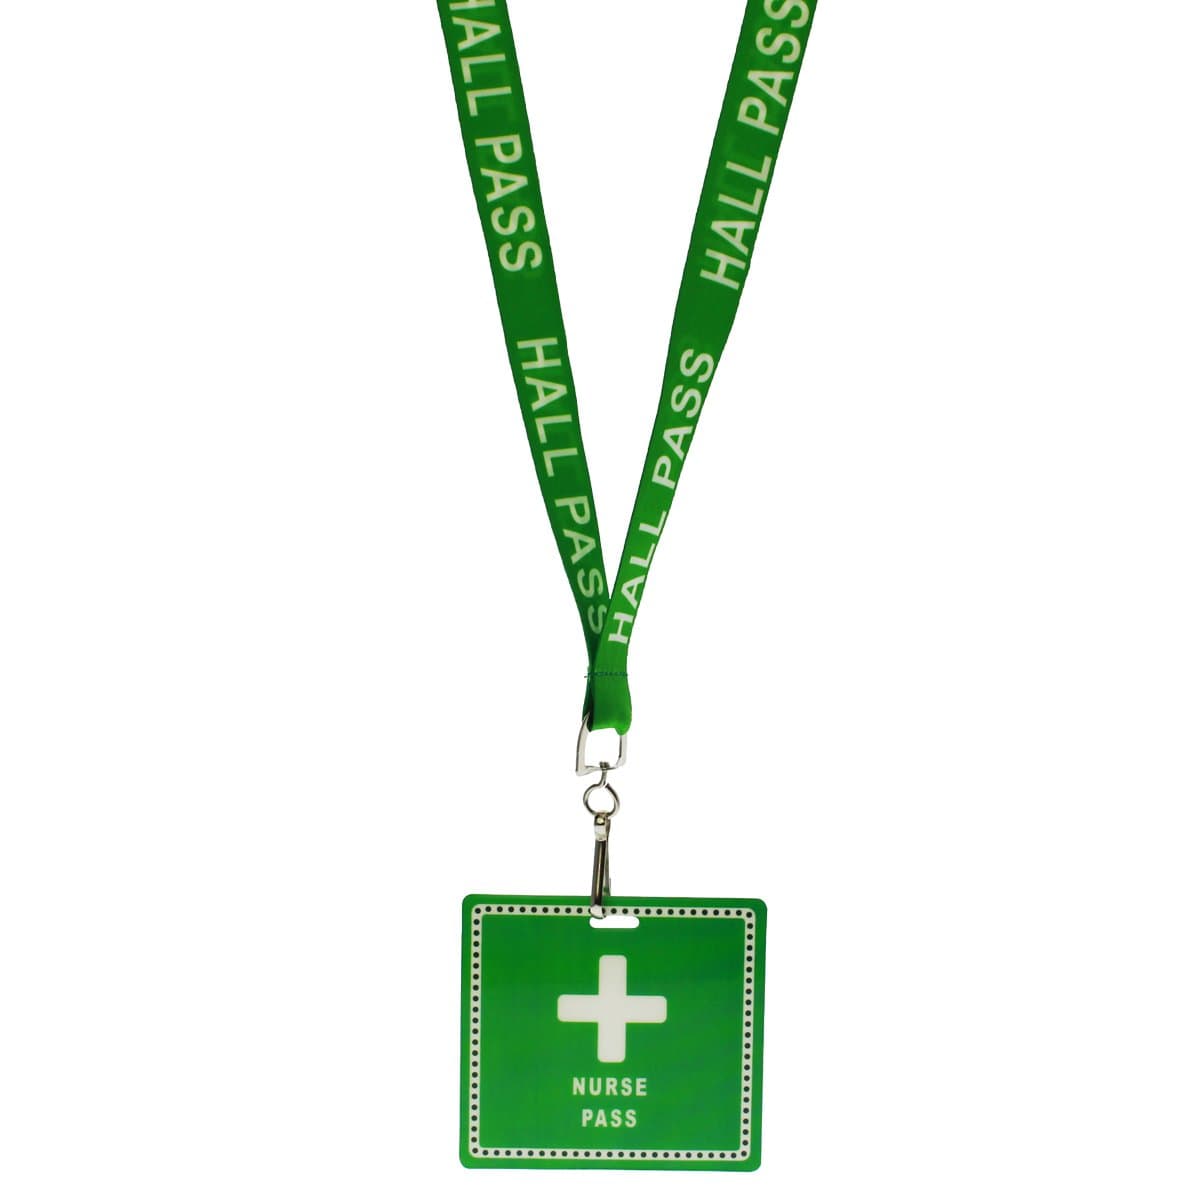 Green lanyard with "HALL PASS" text and a green, waterproof laminated pass card at the end labeled "NURSE PASS" with a white medical cross, from the product line School Hall Pass Lanyards WITH UNBREAKABLE CARD PASSES (SPID-9800).